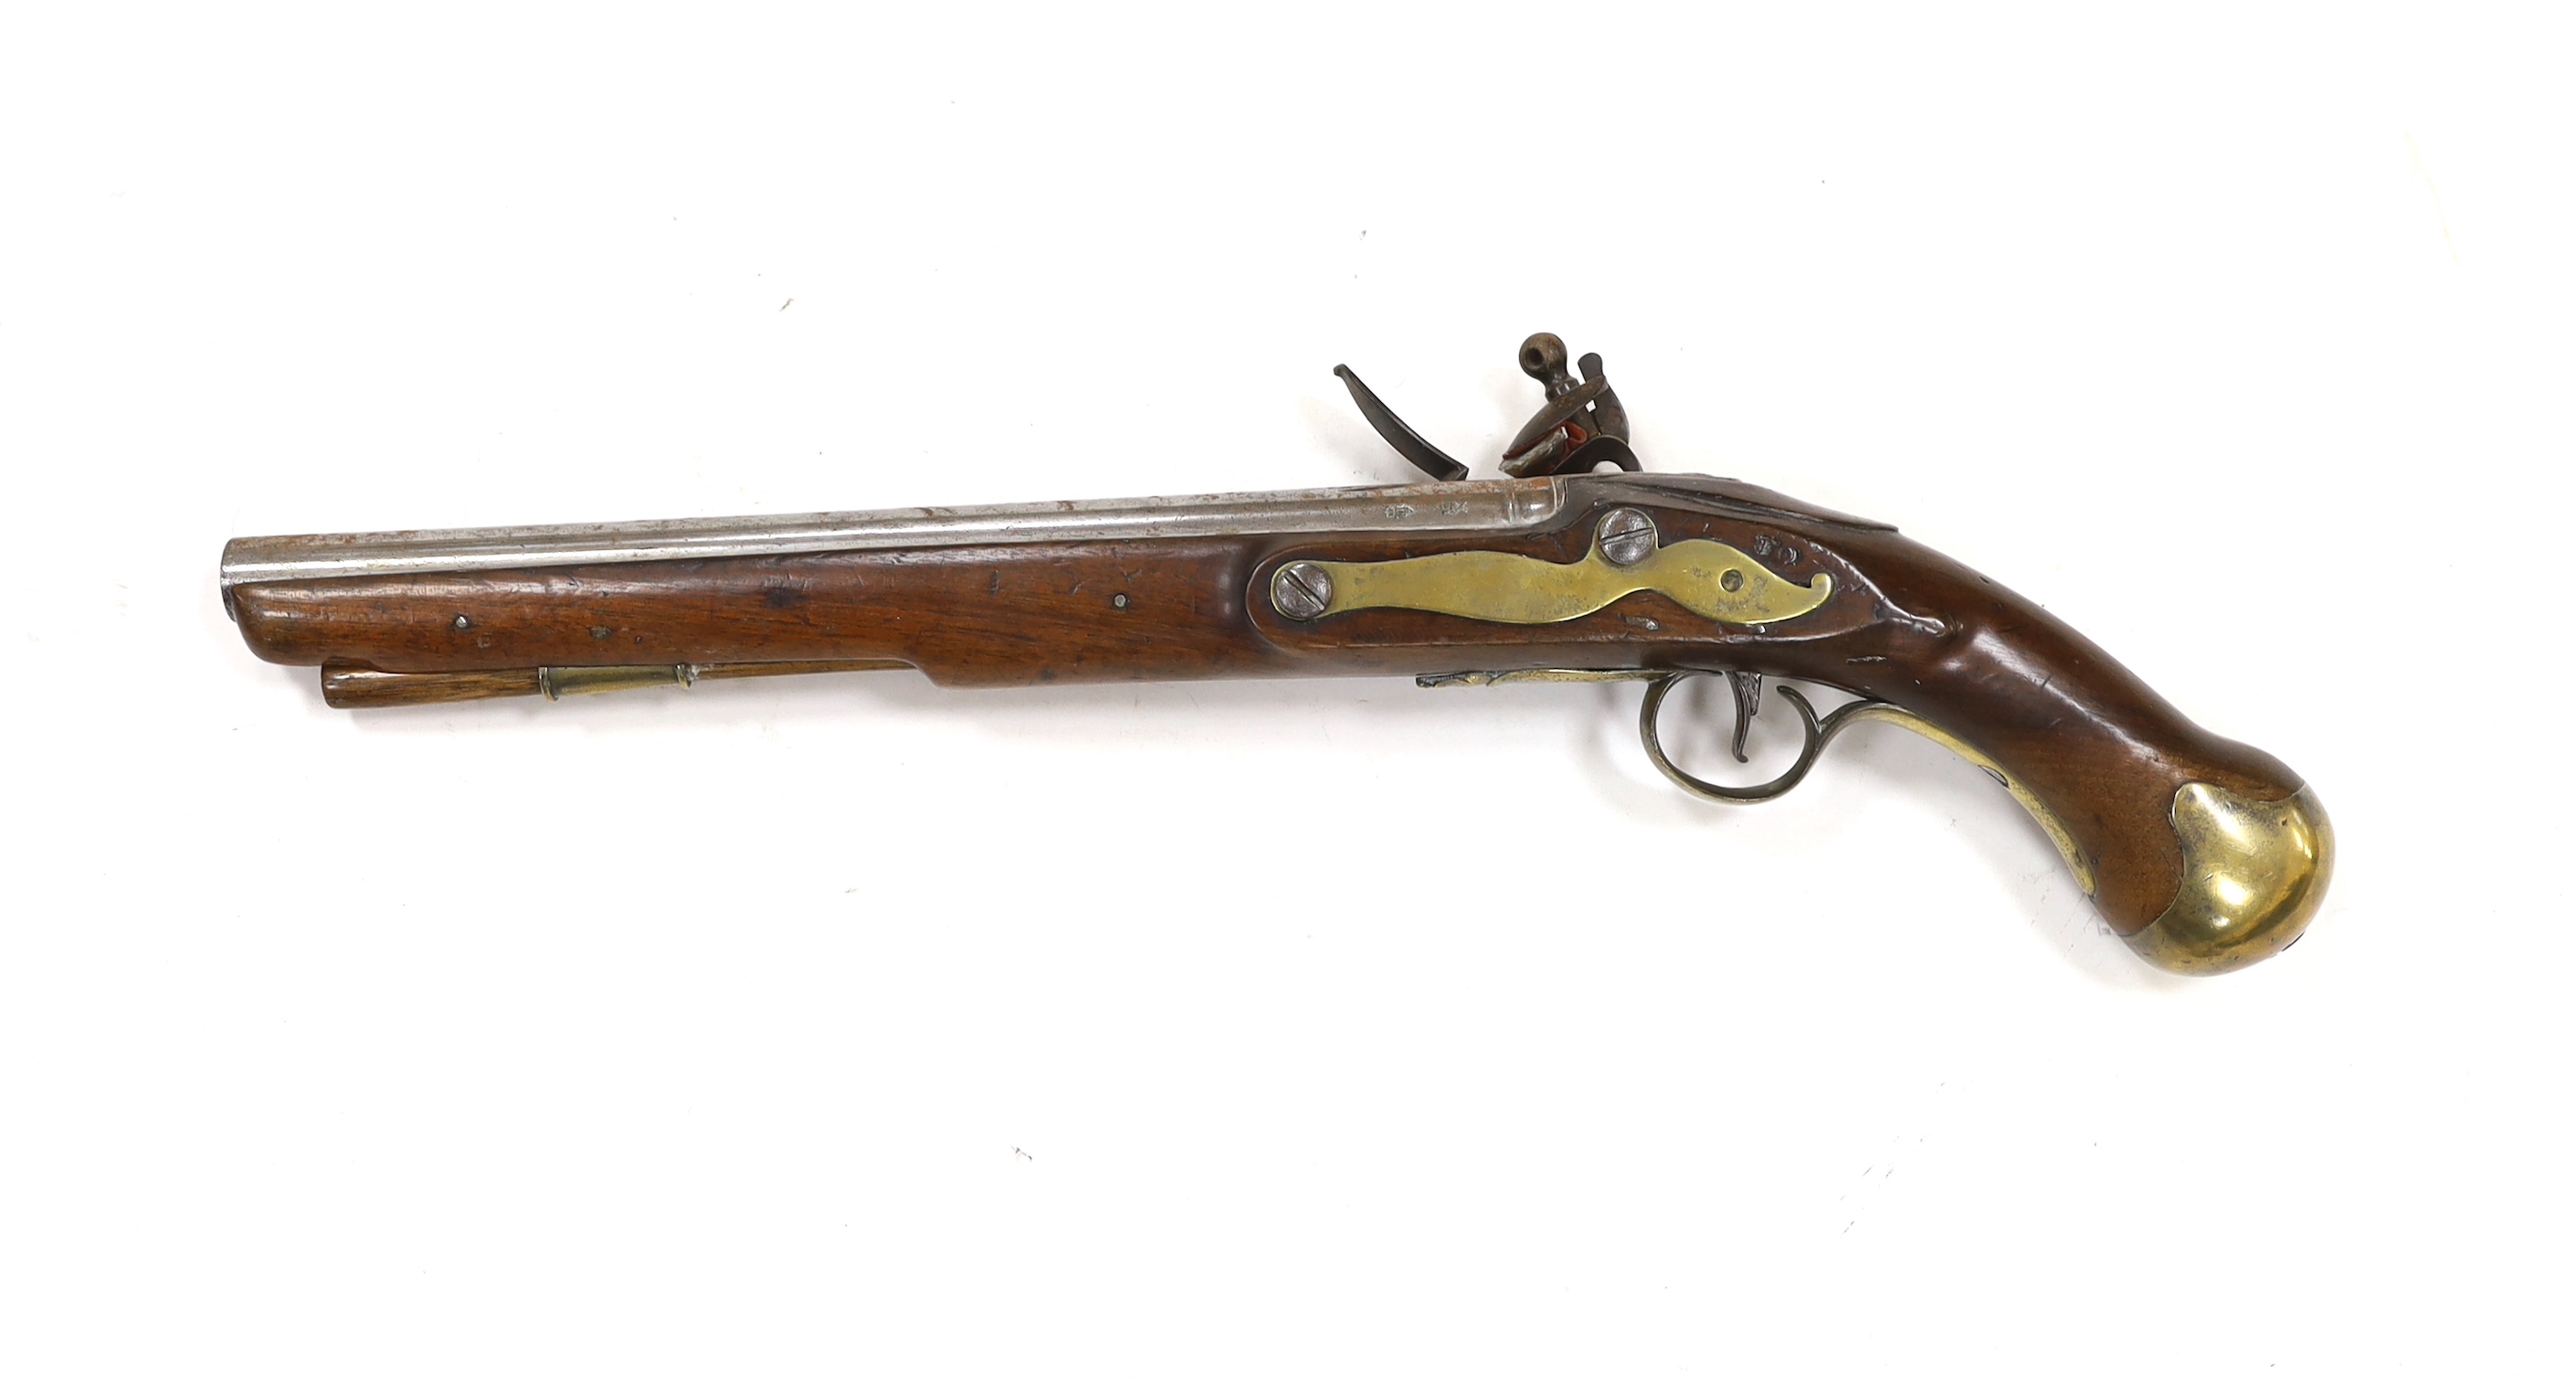 An early 19th century flintlock pistol, fully stocked with Tower proofs and crown over GR stamp to lock, plain brass butt cap and trigger guard